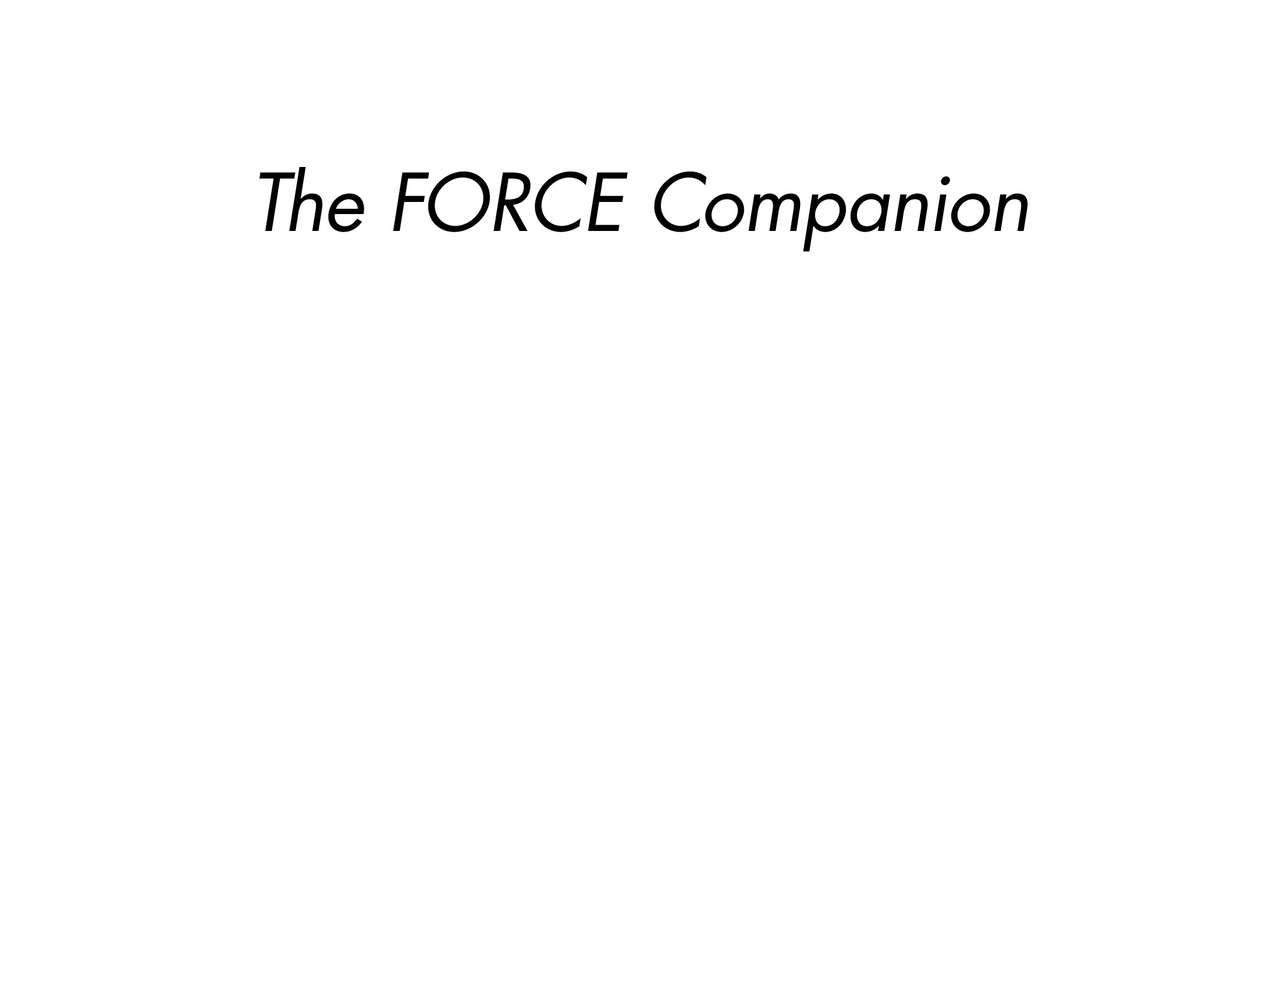 The Force companion_ quick tips and tricks-CRC Press (2019) - Michael D. Mattesi [Digital] 2